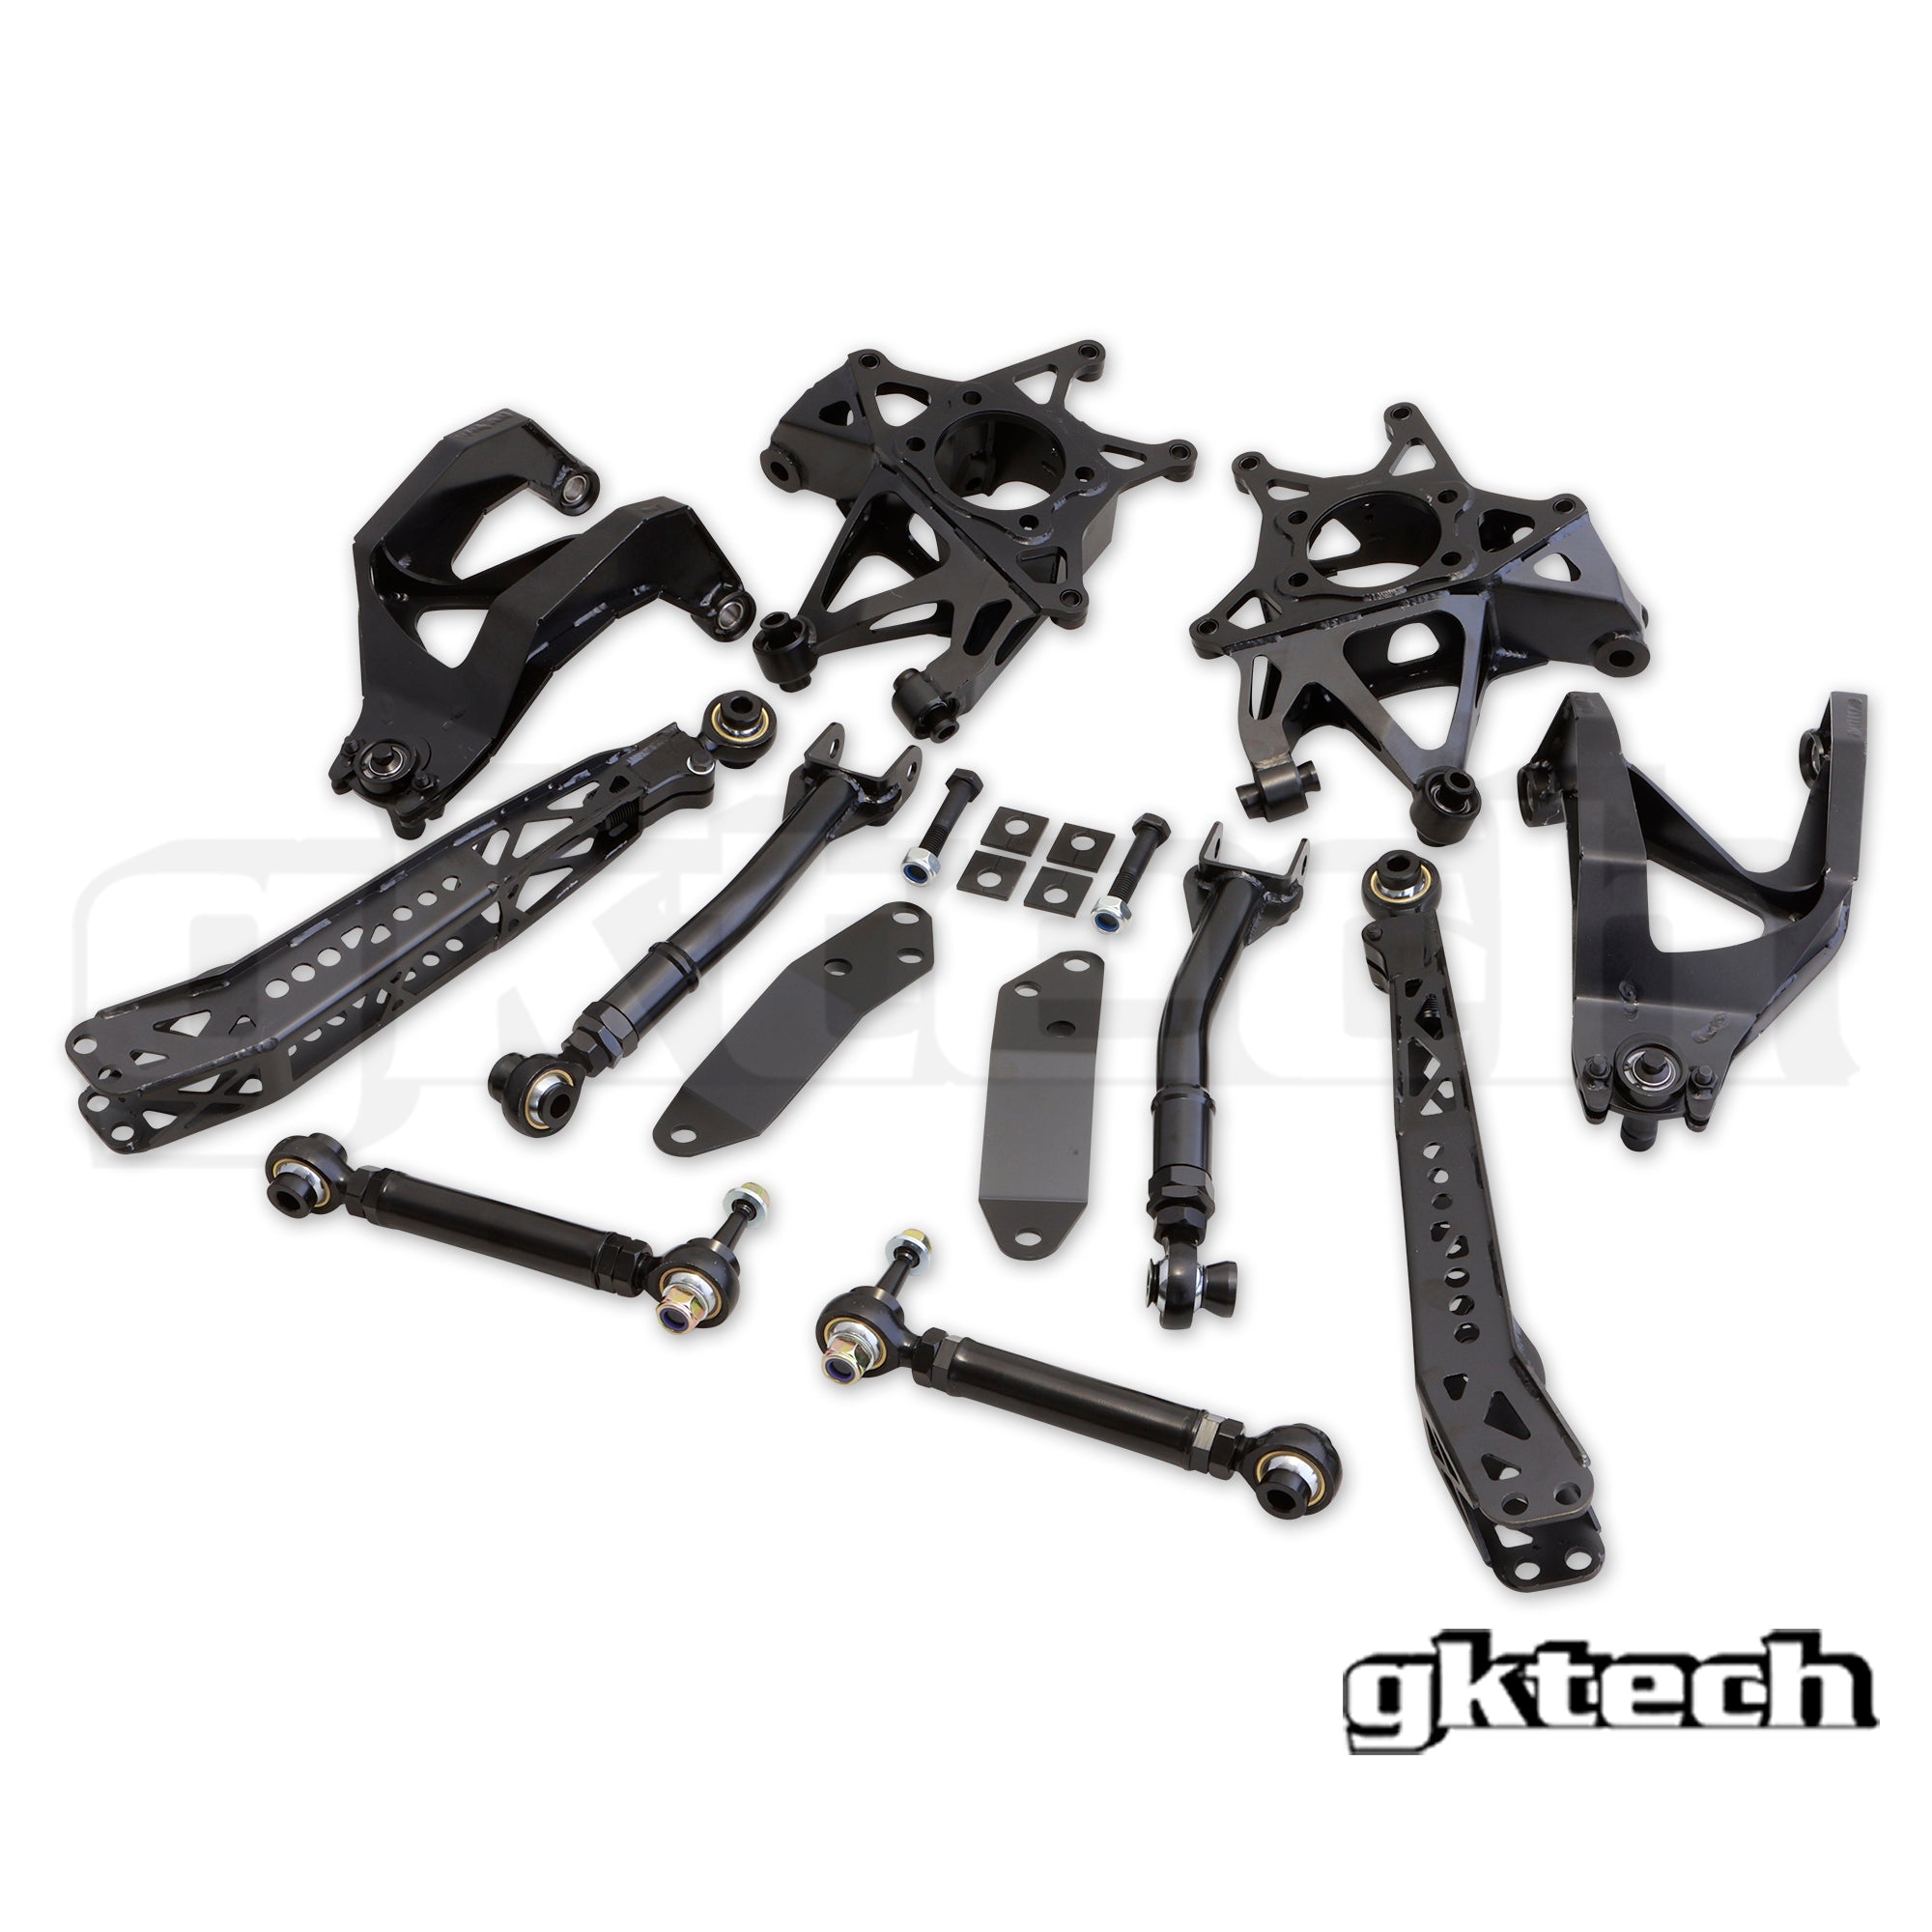 FR-S / GR86 / BRZ rear suspension package (20% combo discount)